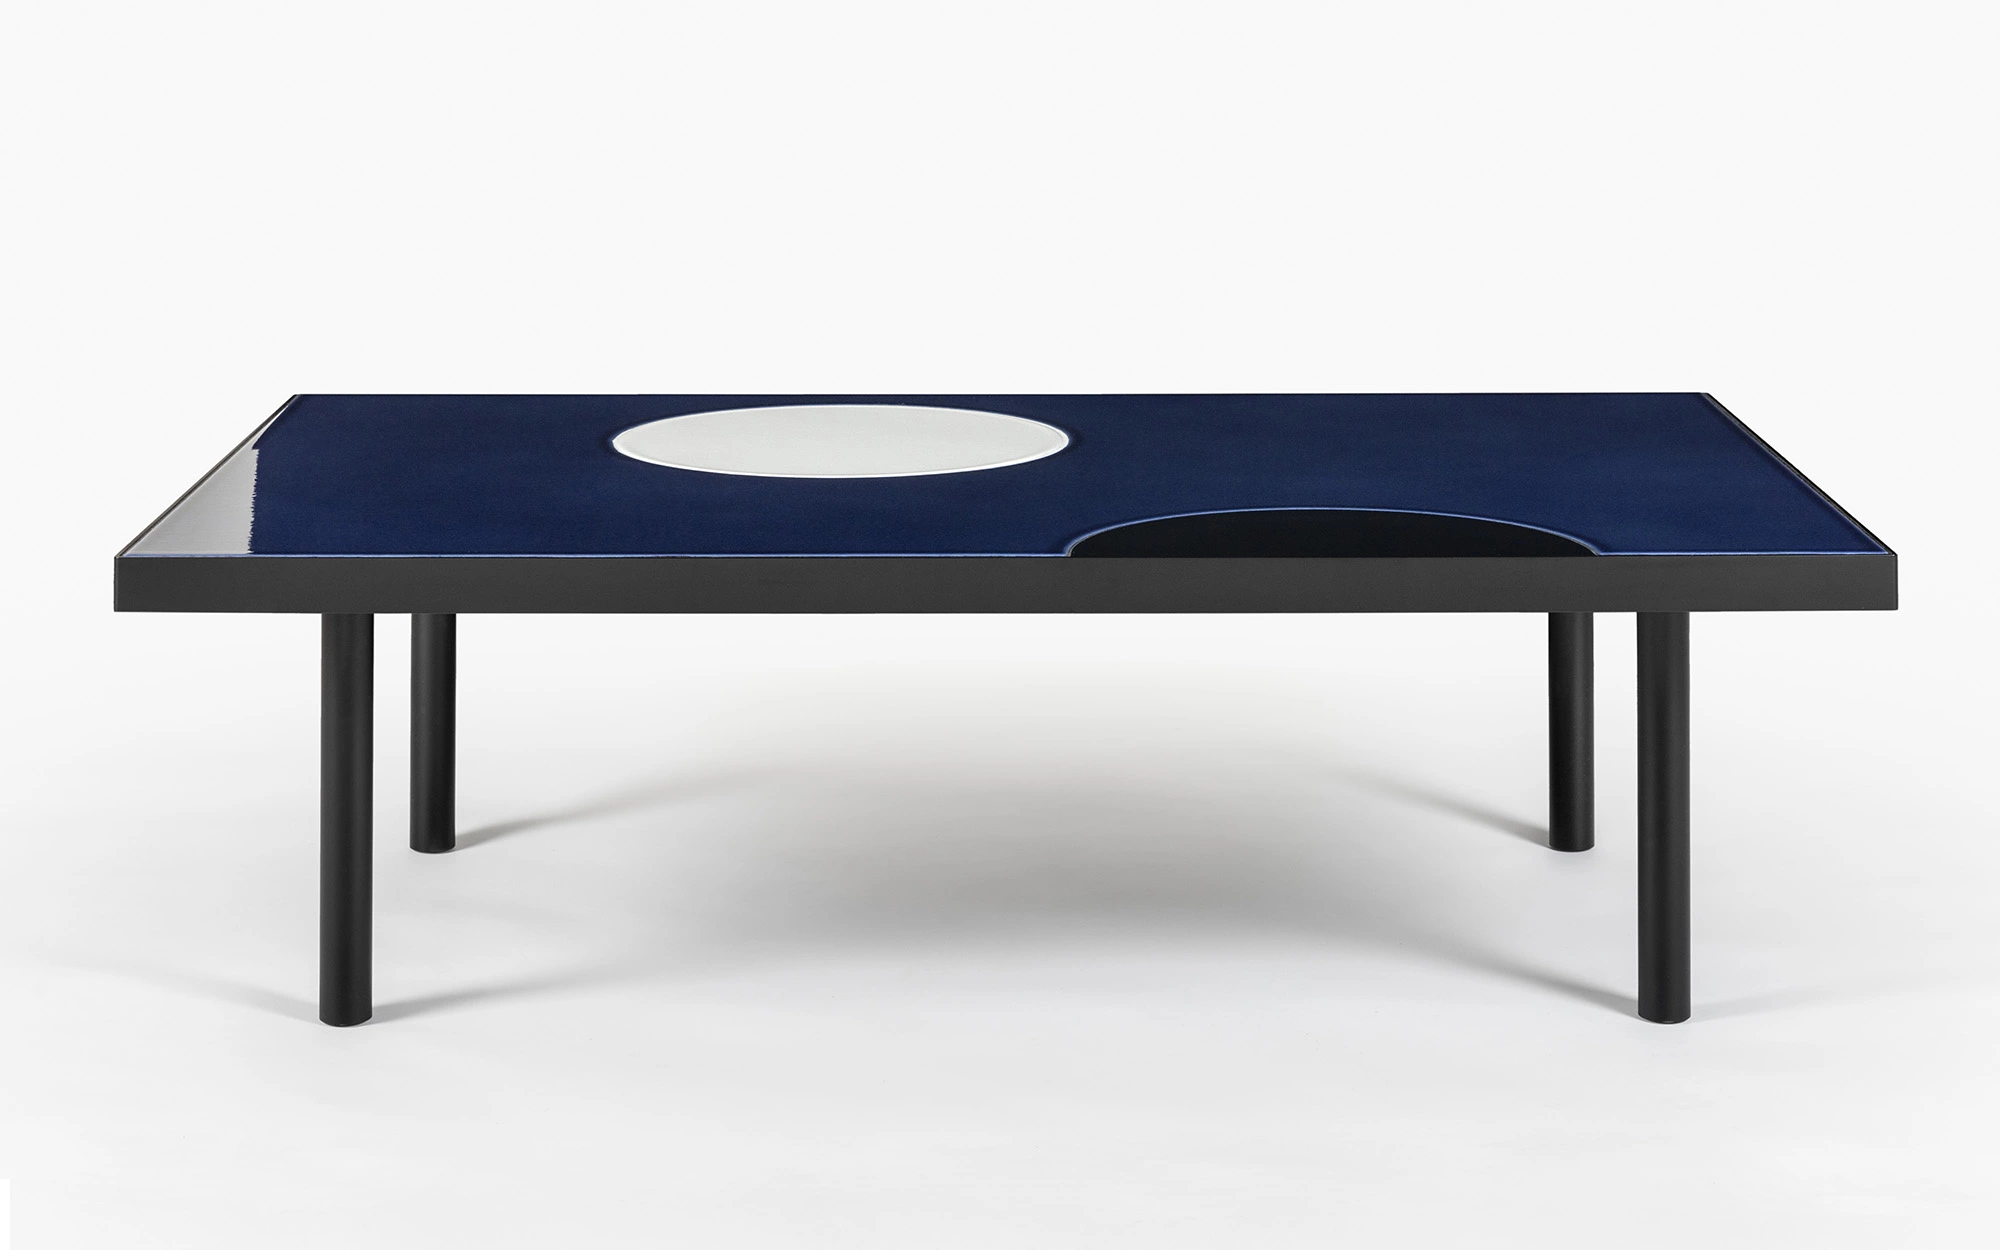 Translation Discolo Coffee Table - Pierre Charpin - Vase - Galerie kreo